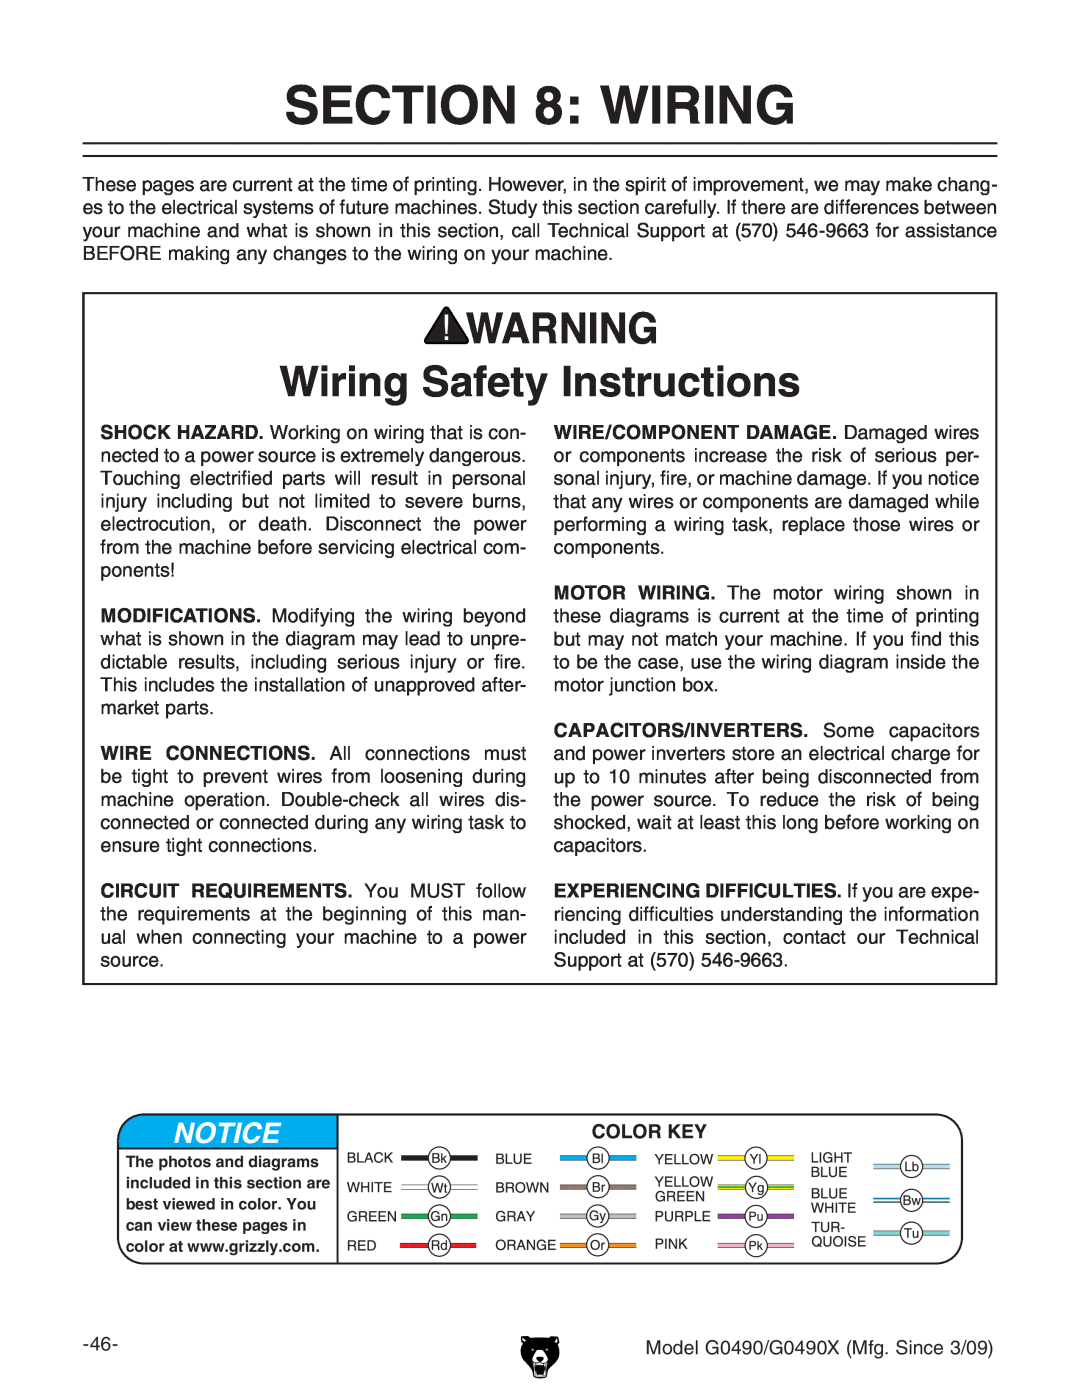 Grizzly G0490 owner manual Wiring Safety Instructions, SHOCK HAZARD. Ldg`c\dclgc\iVihXdc, XdbedcZcih#, edcZcih 